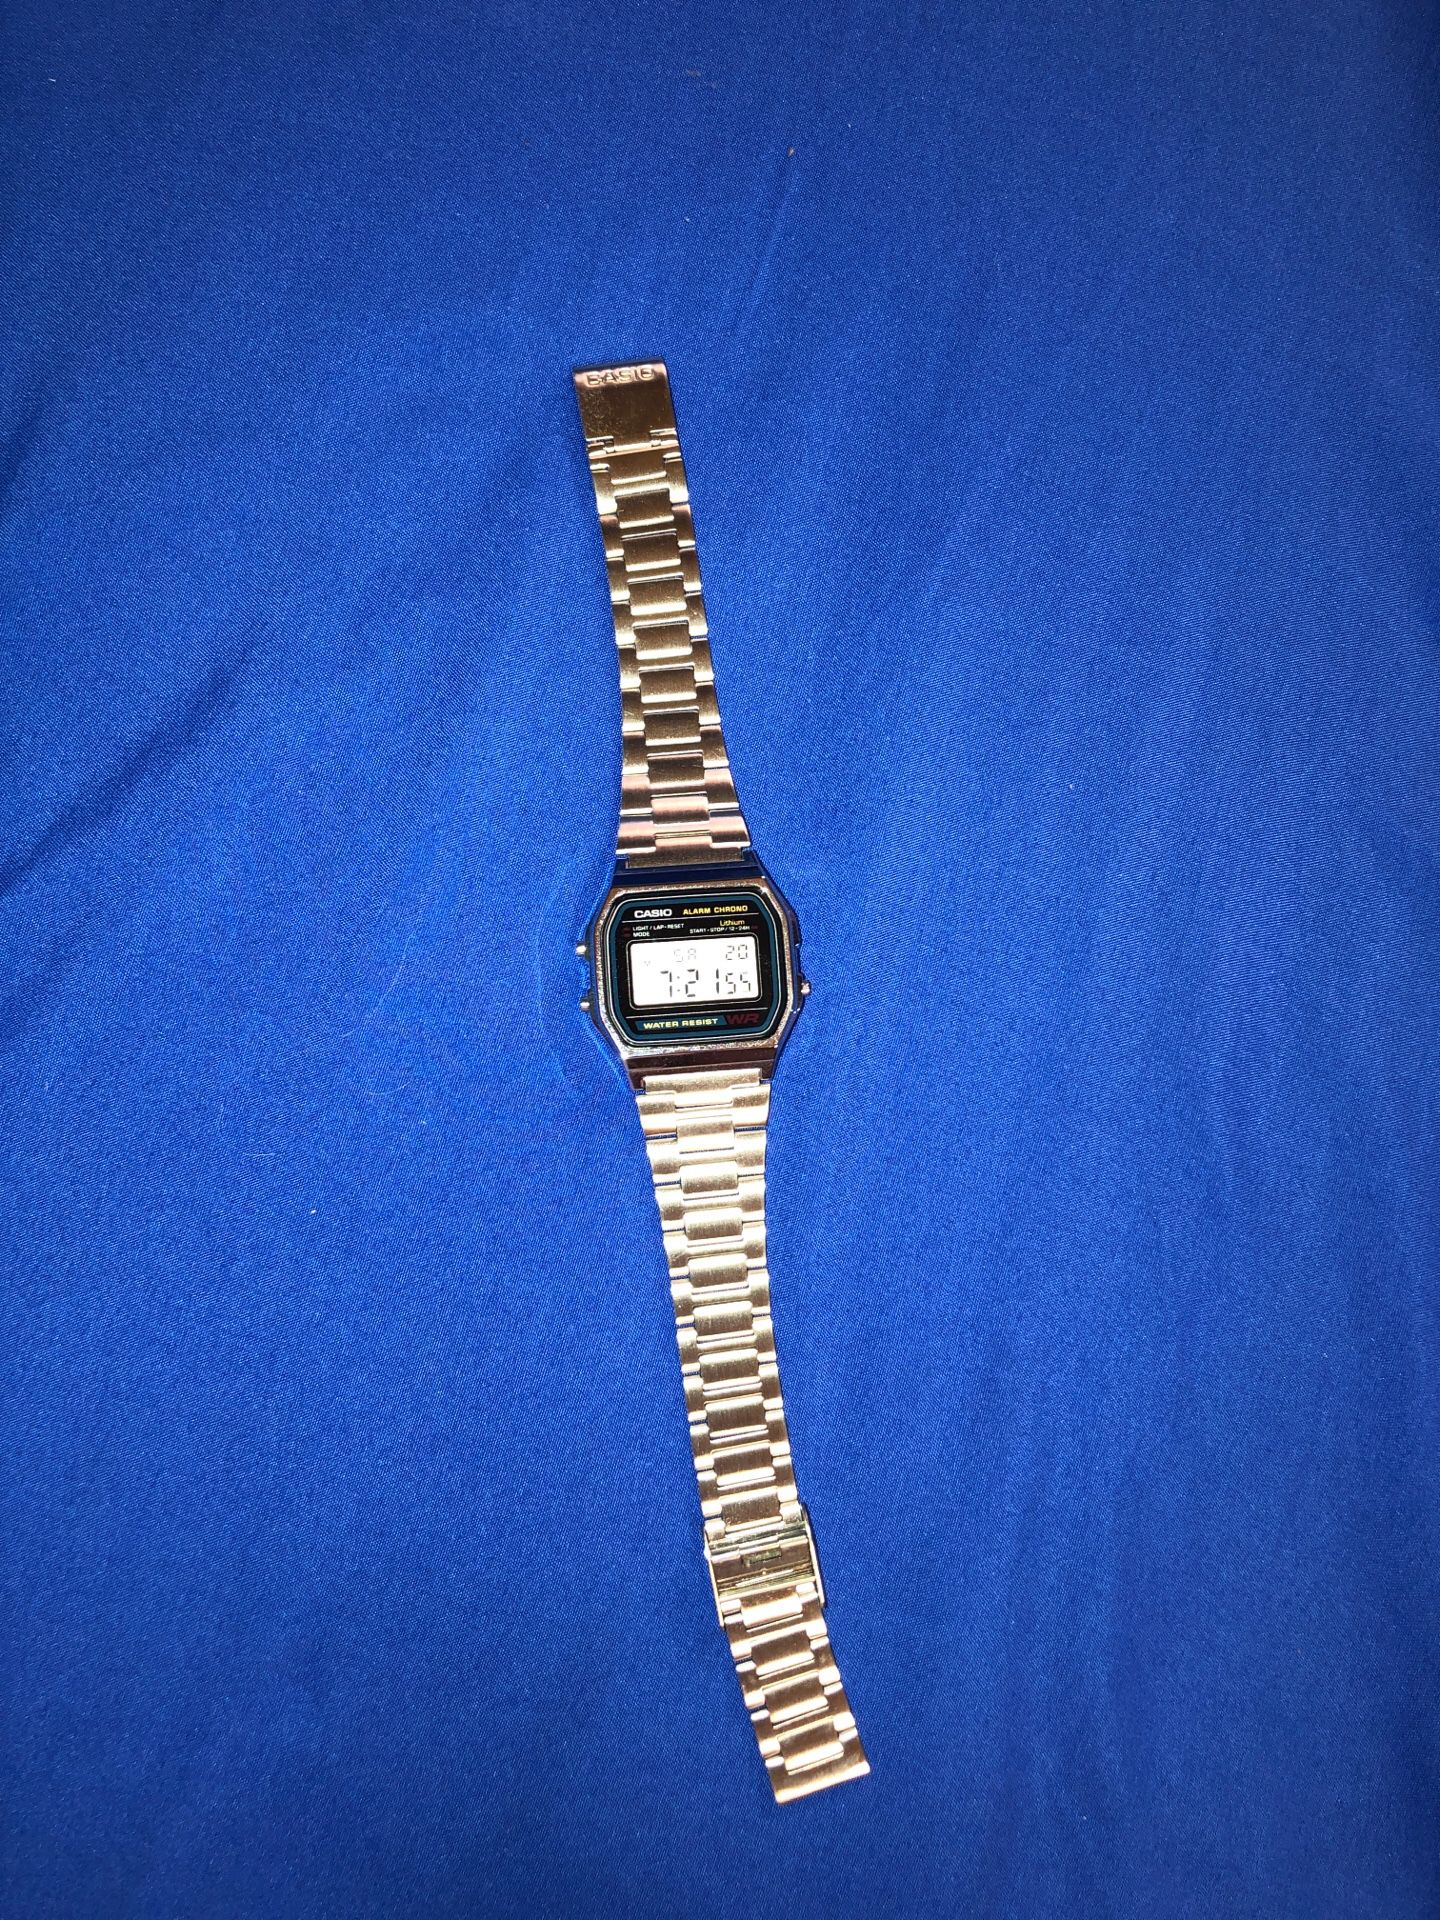 Casio watch almost new